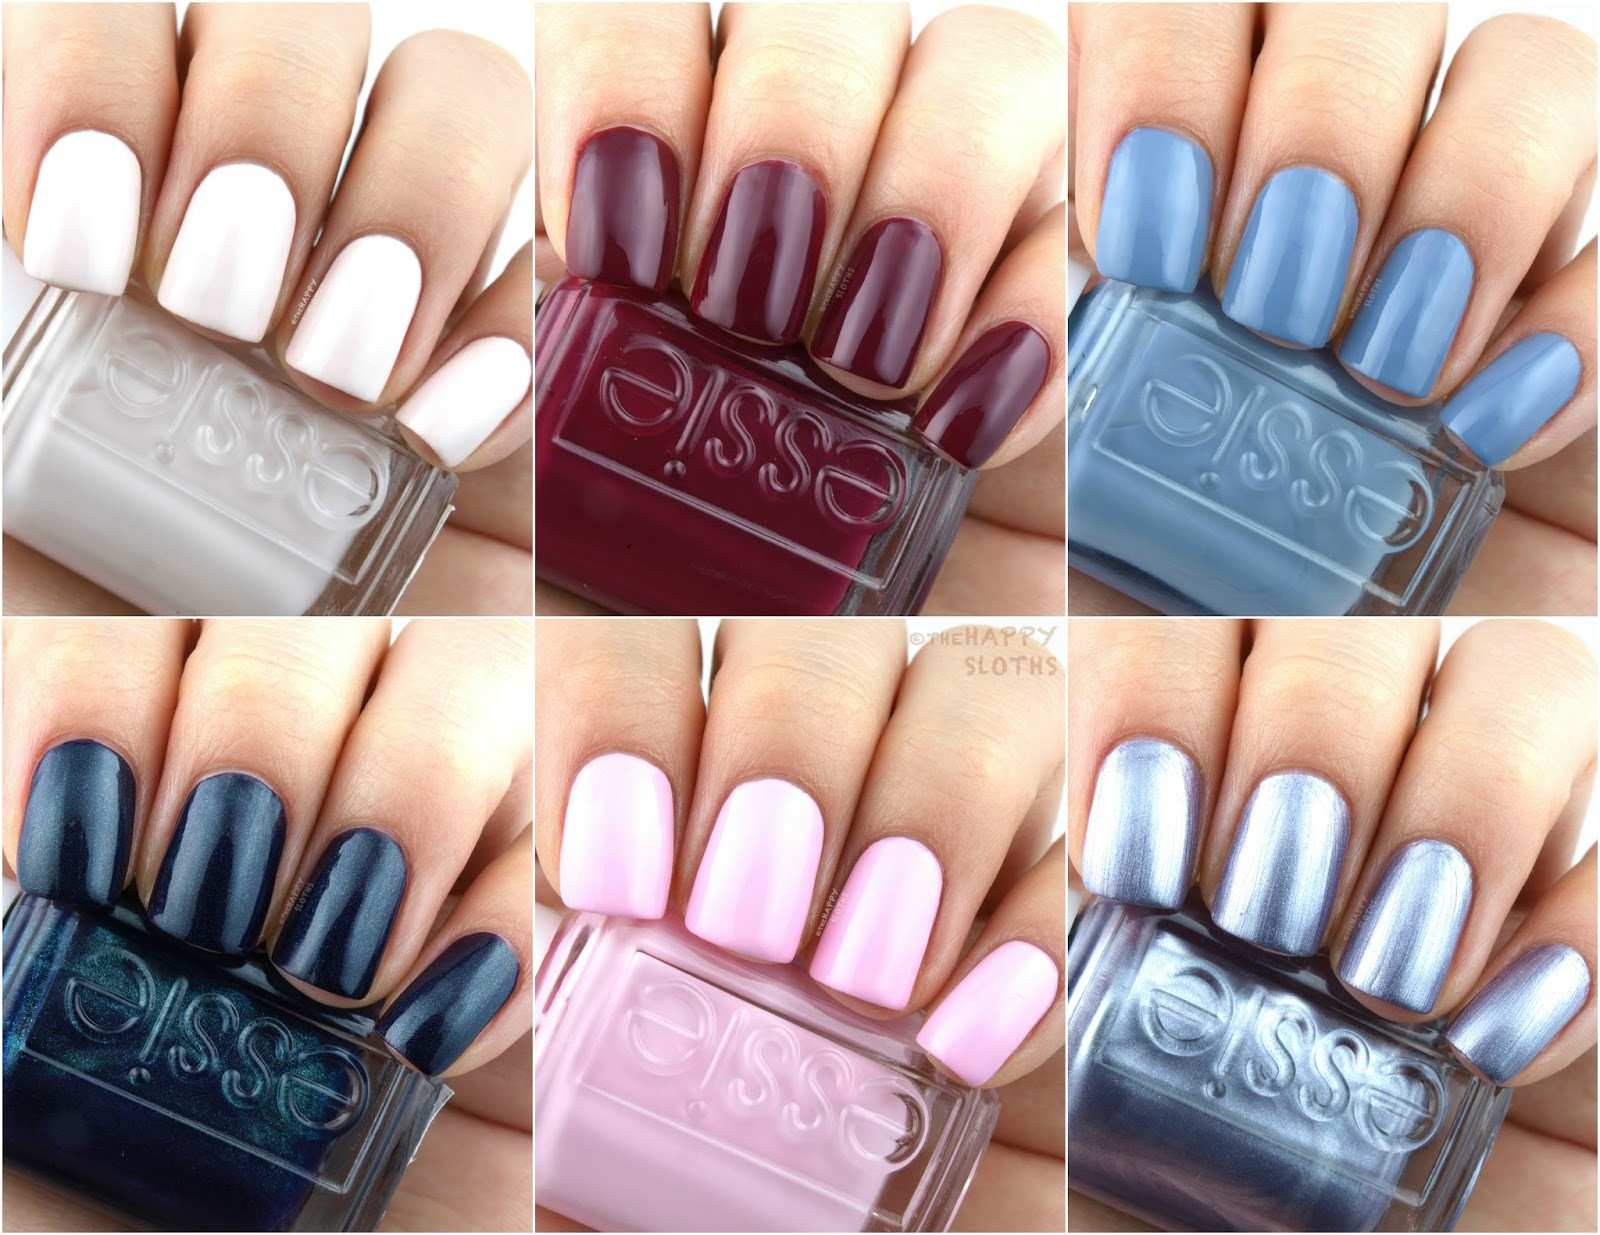 Essie Fall Nail Colors
 90s Inspired Nail Colors